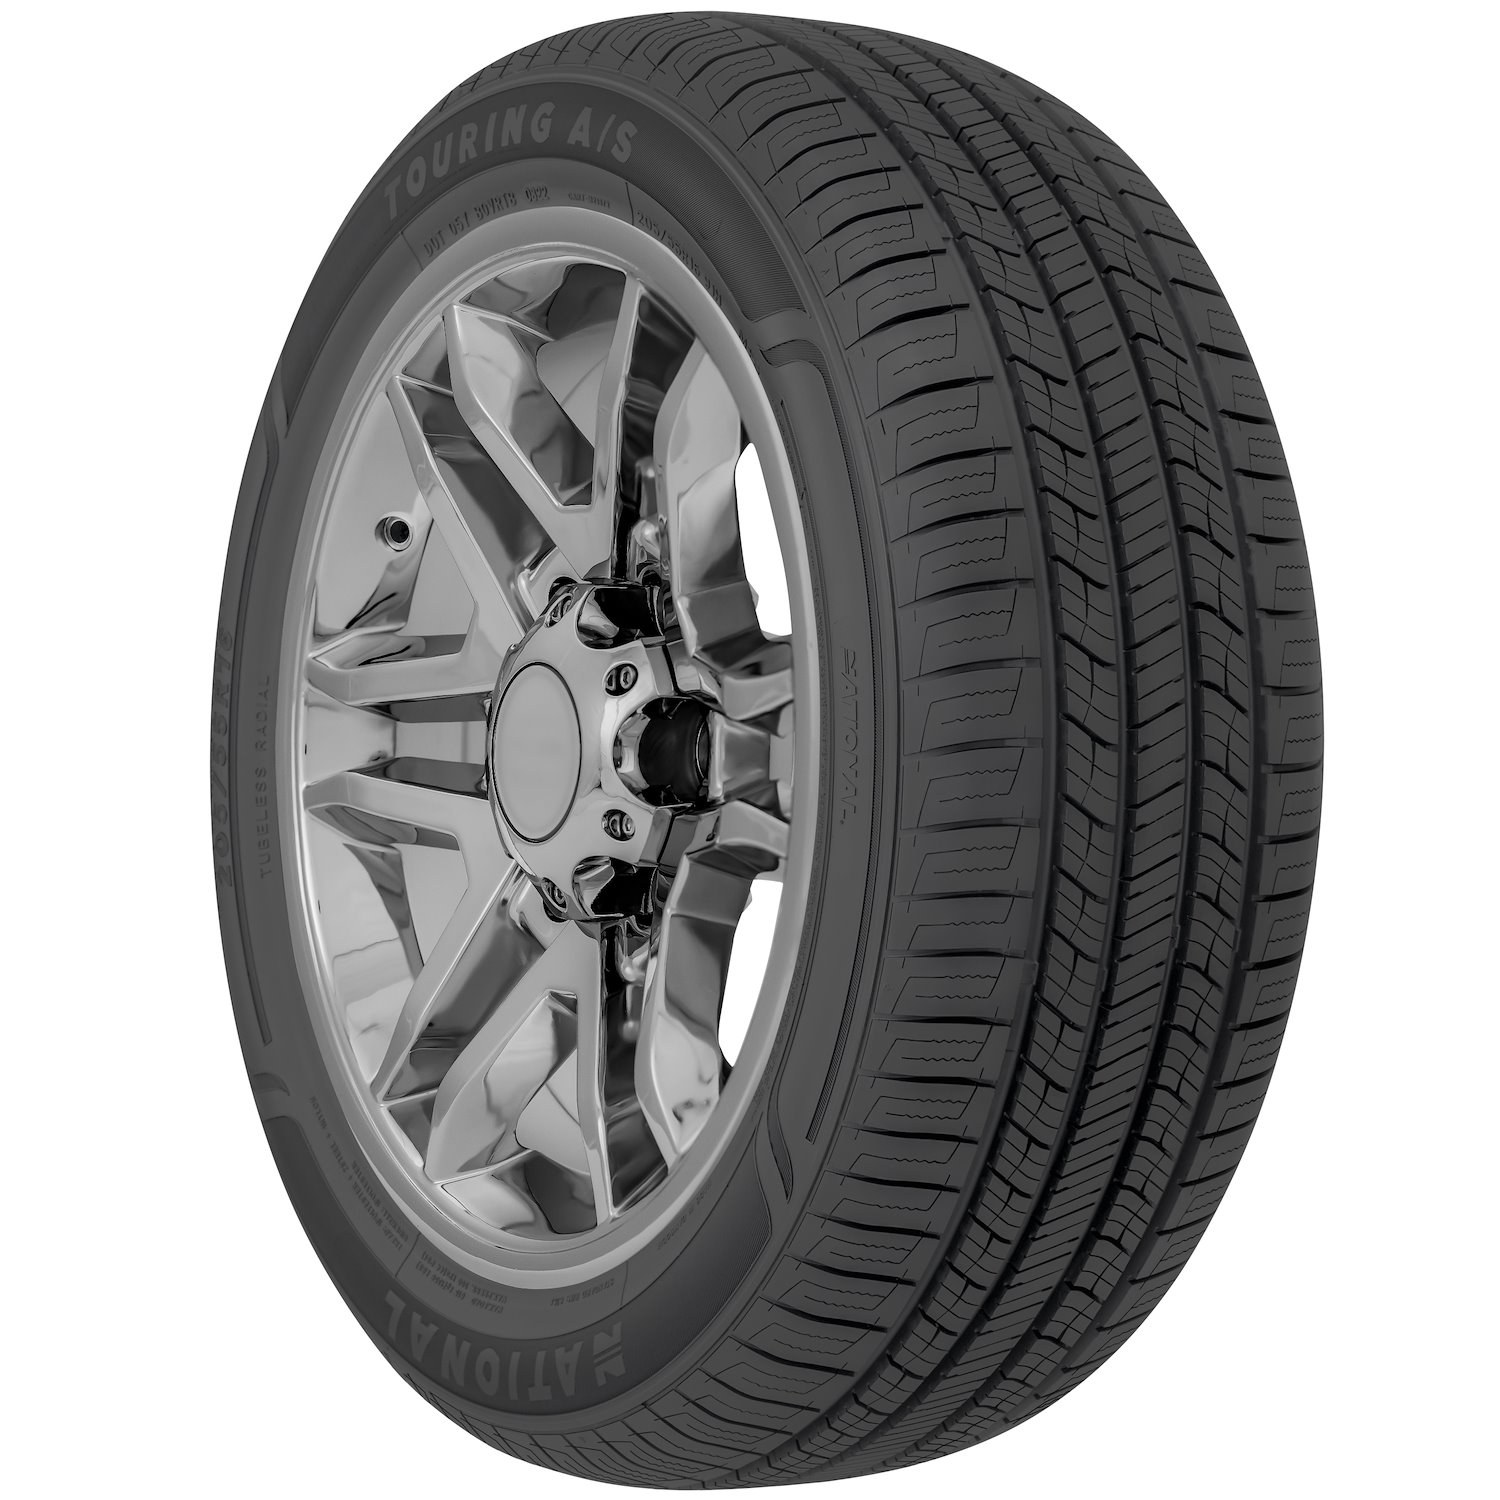 NLR76 Touring A/S Tire, 225/65R17